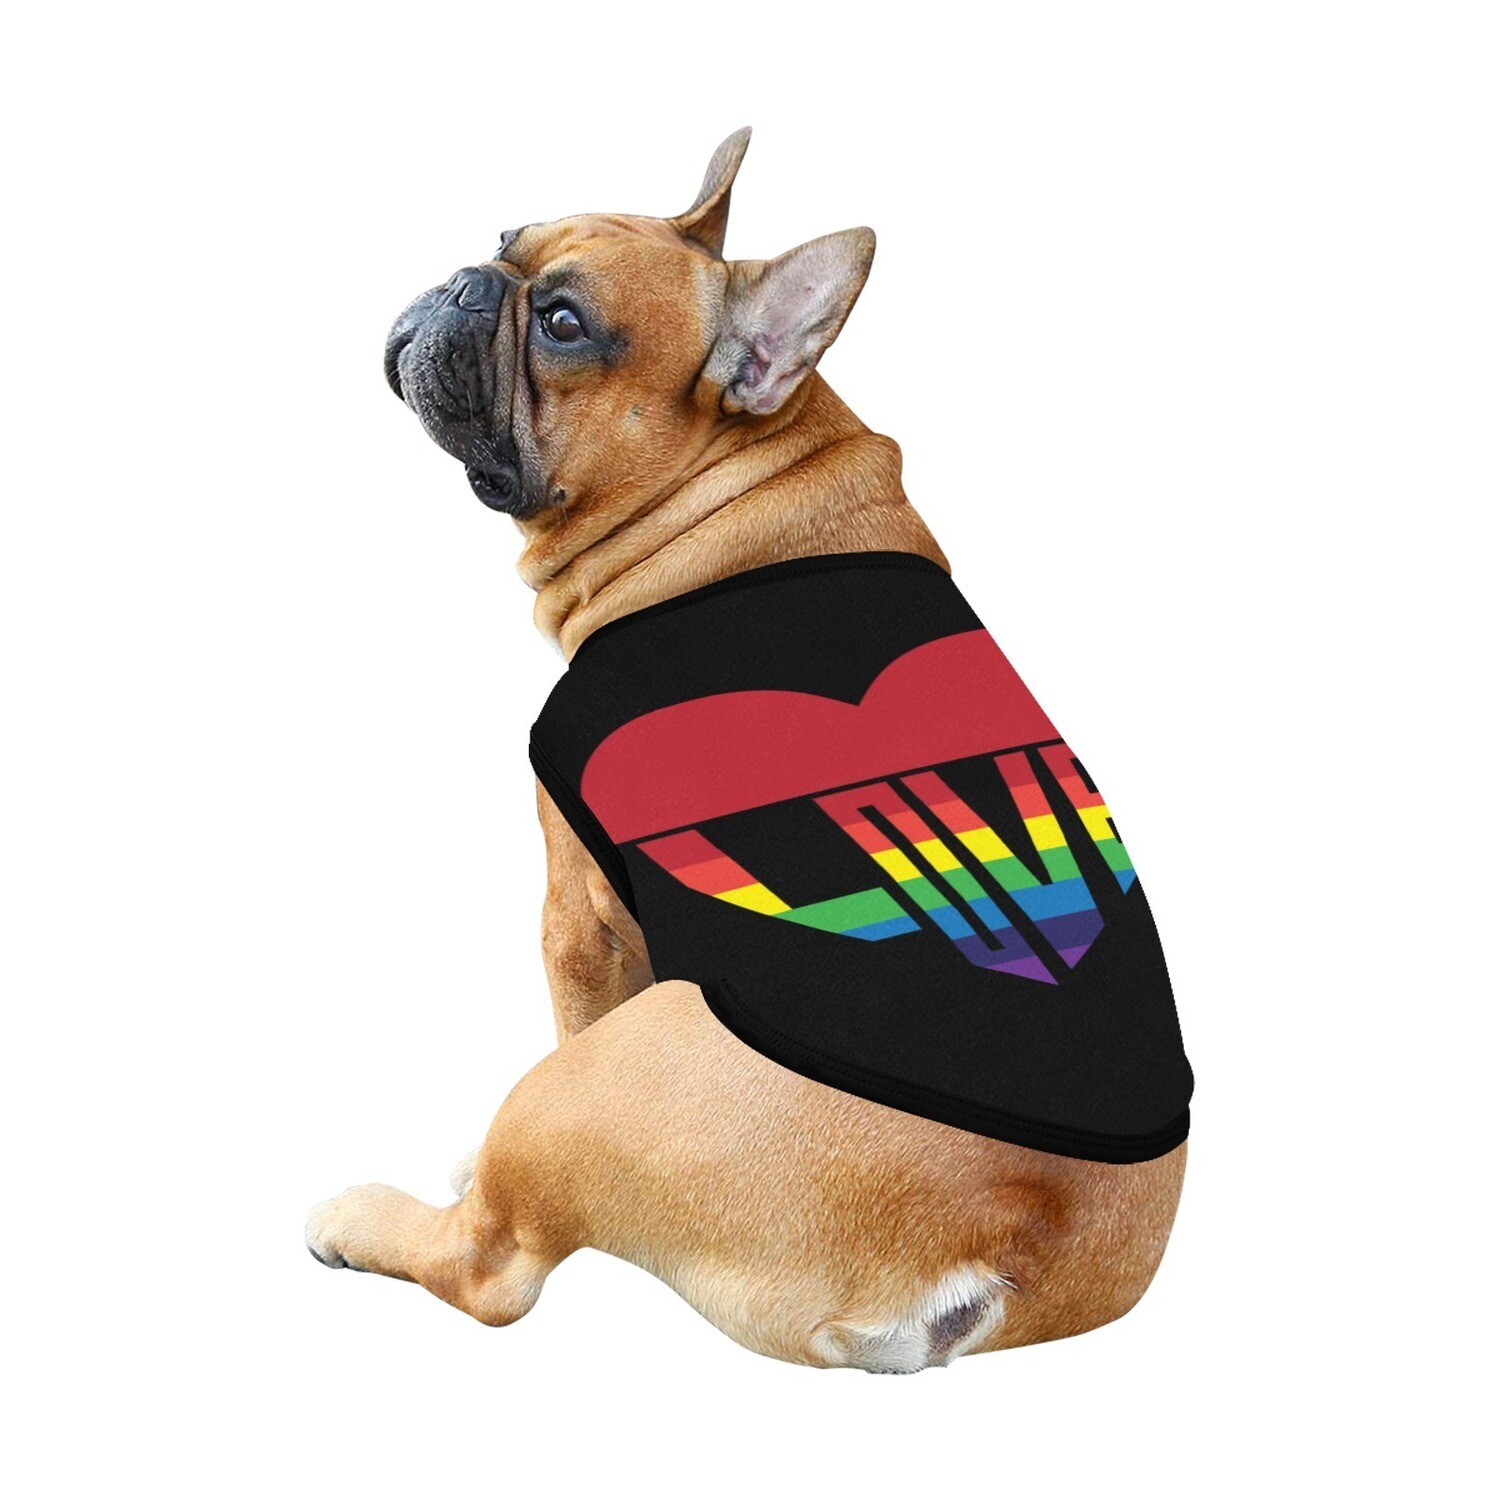 🐕🏳️‍🌈 Love is Love LGBTQ flag heart Dog Tank Top, Dog shirt, Dog t-shirt, Dog clothes, Dog clothing, 7 sizes XS to 3XL, LGBT, Dog gift, Gift for dogs